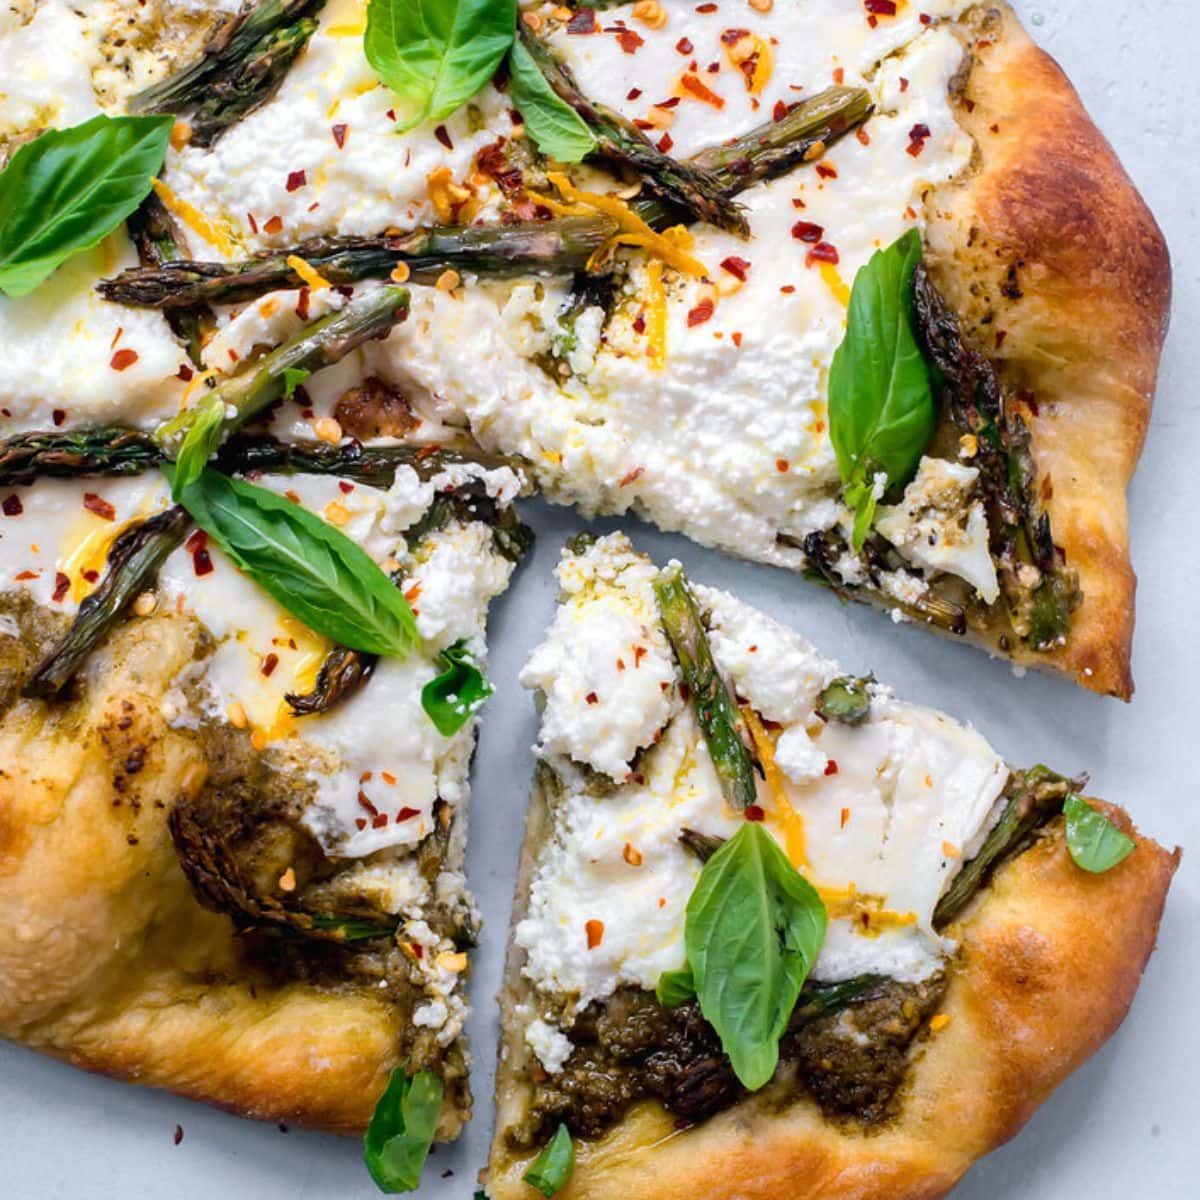 Pizza topped with pesto, grilled asparagus, lemon zest and fresh basil leaves.ricotta, burrata